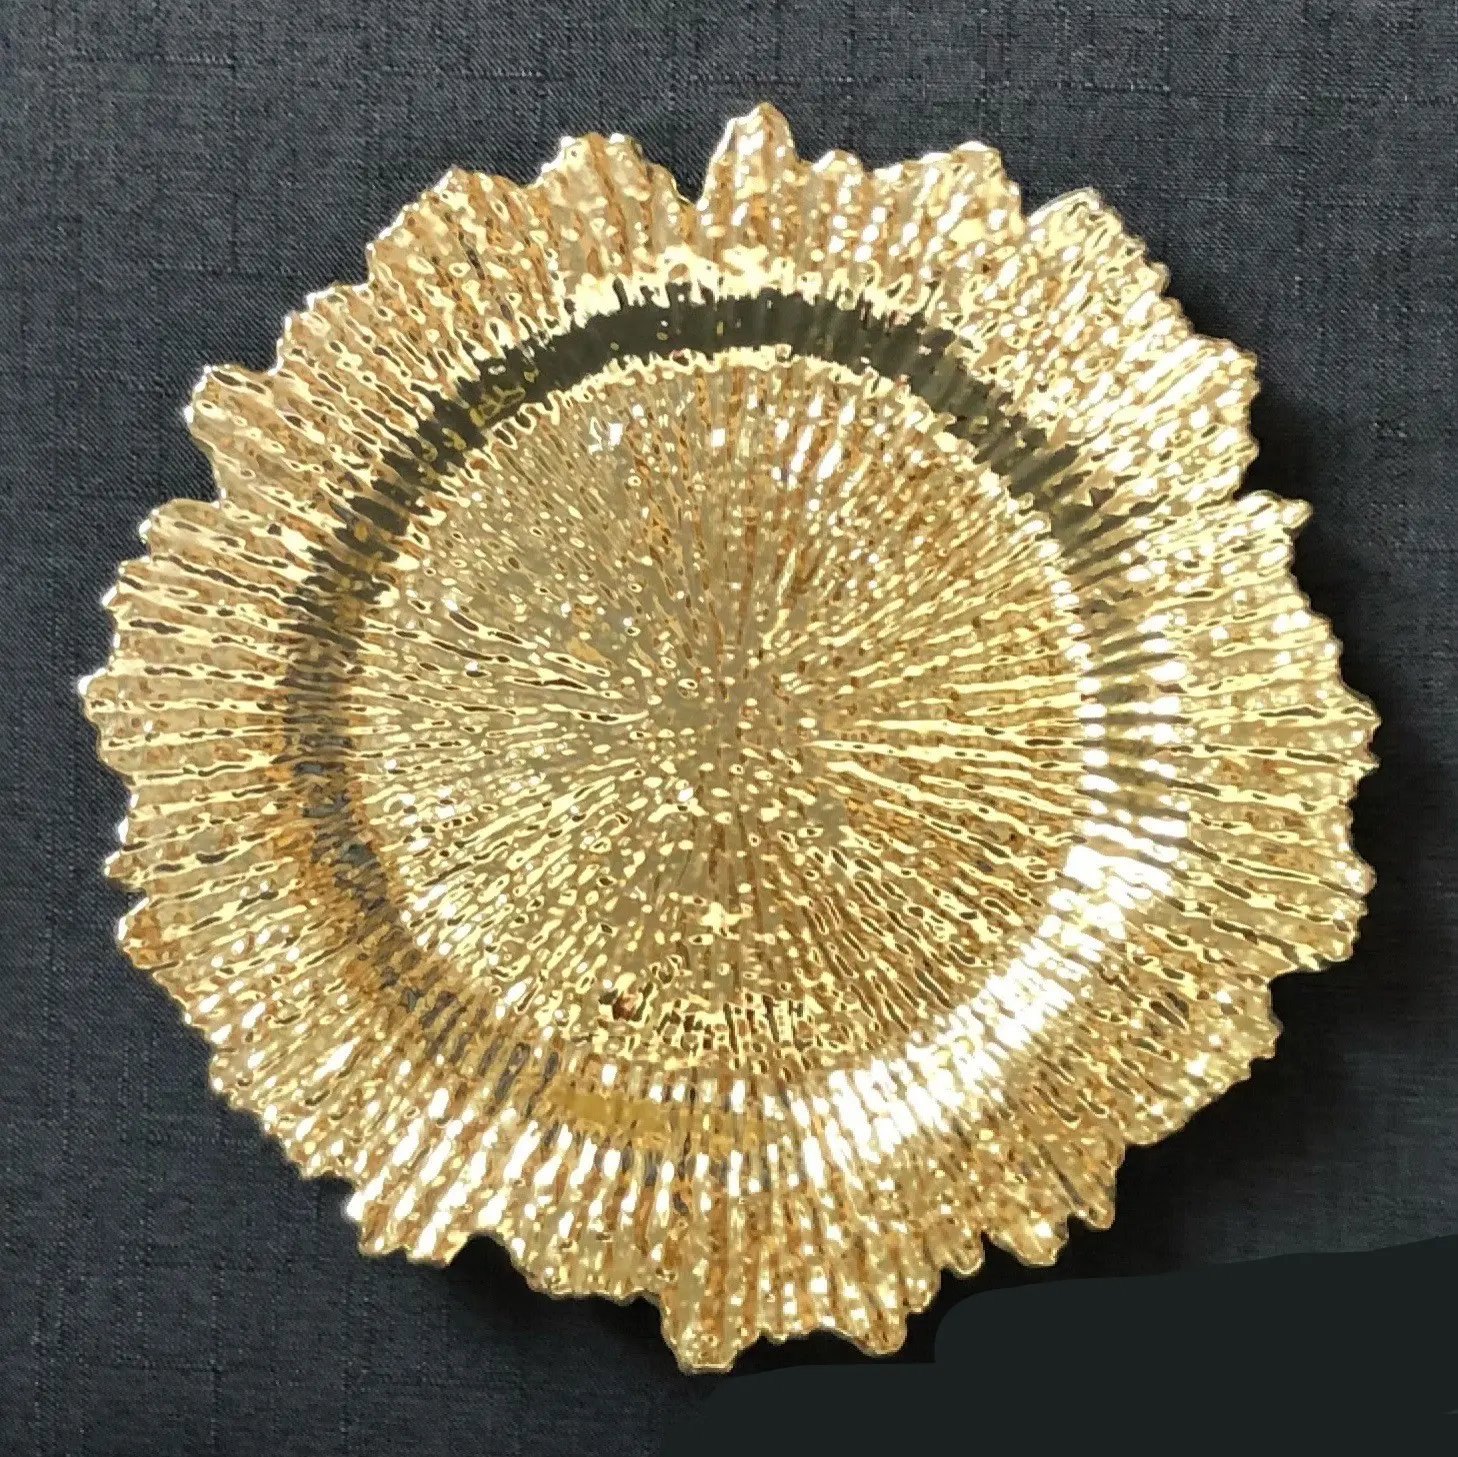 Decorative Gold Silver Various Colors Table Party Plates 13 inch Round Plastic Reef Plate For Home Wedding Party Decor